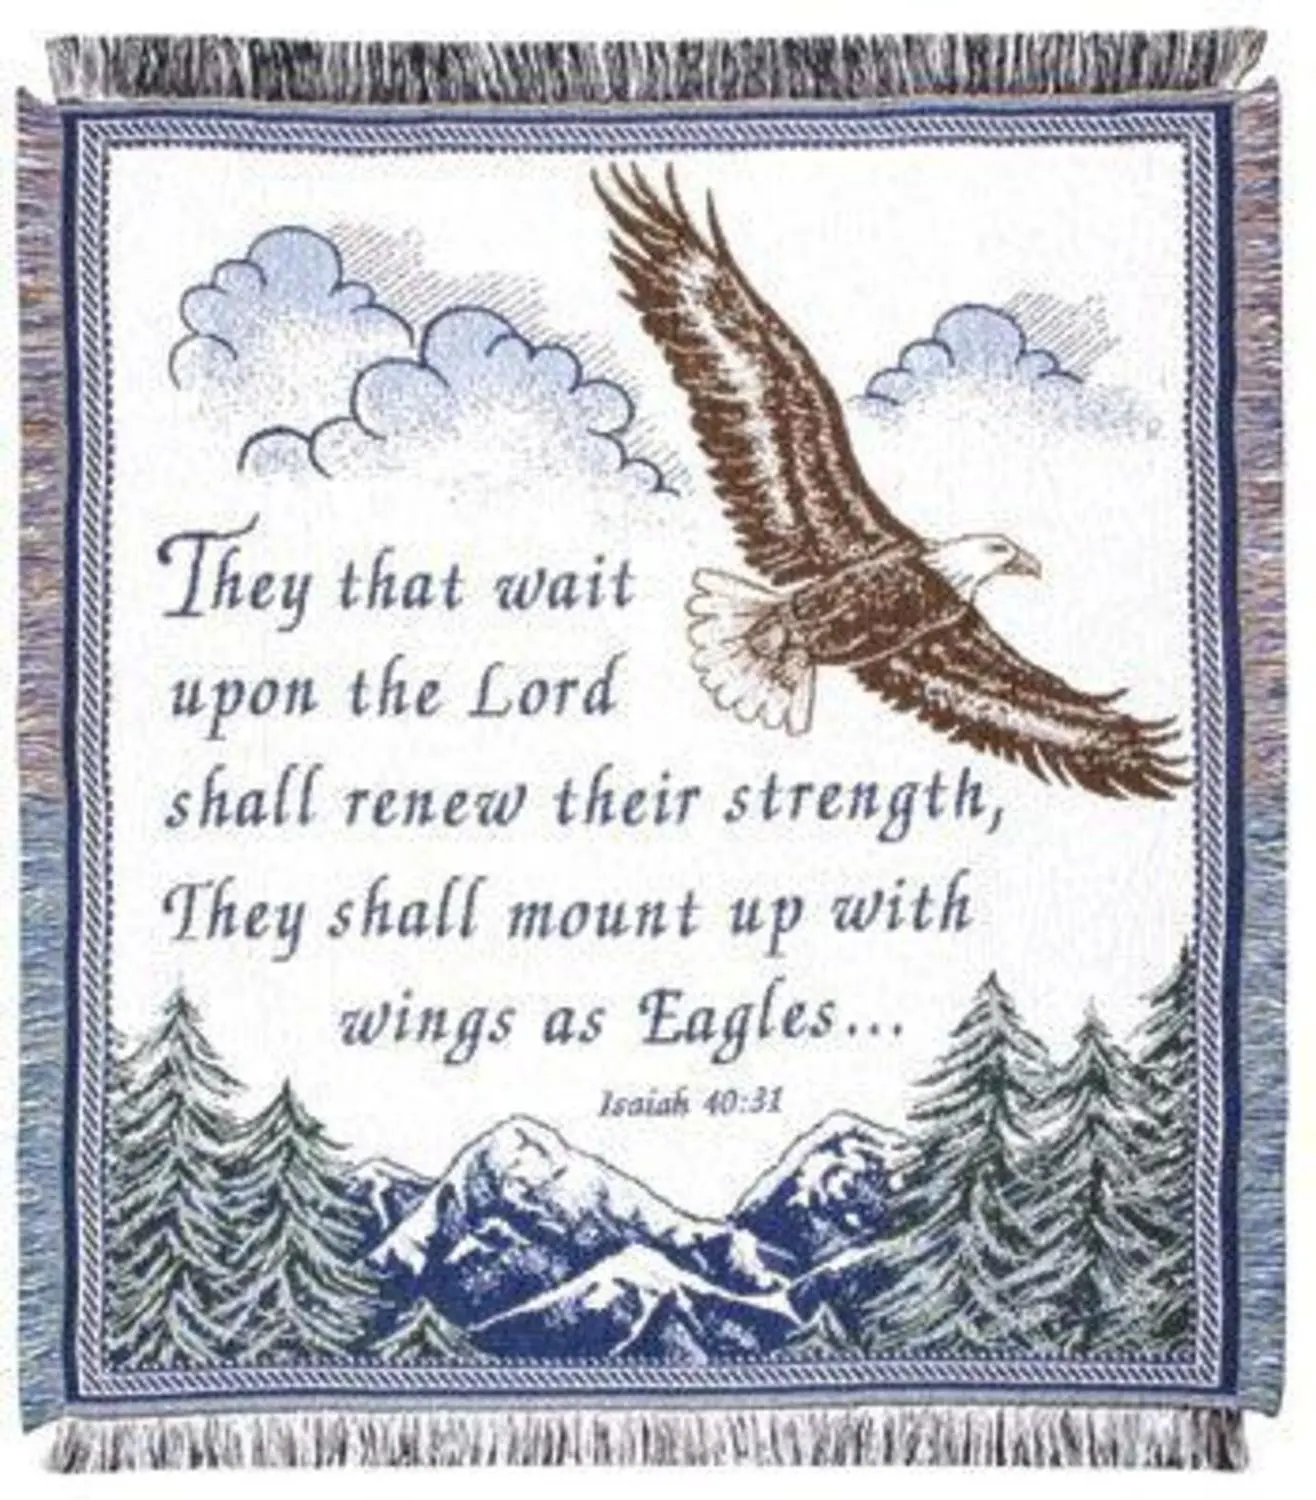 Joseph Studio 60873 Soaring Eagle Garden Stone with Verse They Will Soar on Wings Like Eagles Isaiah 40:31 11-Inch